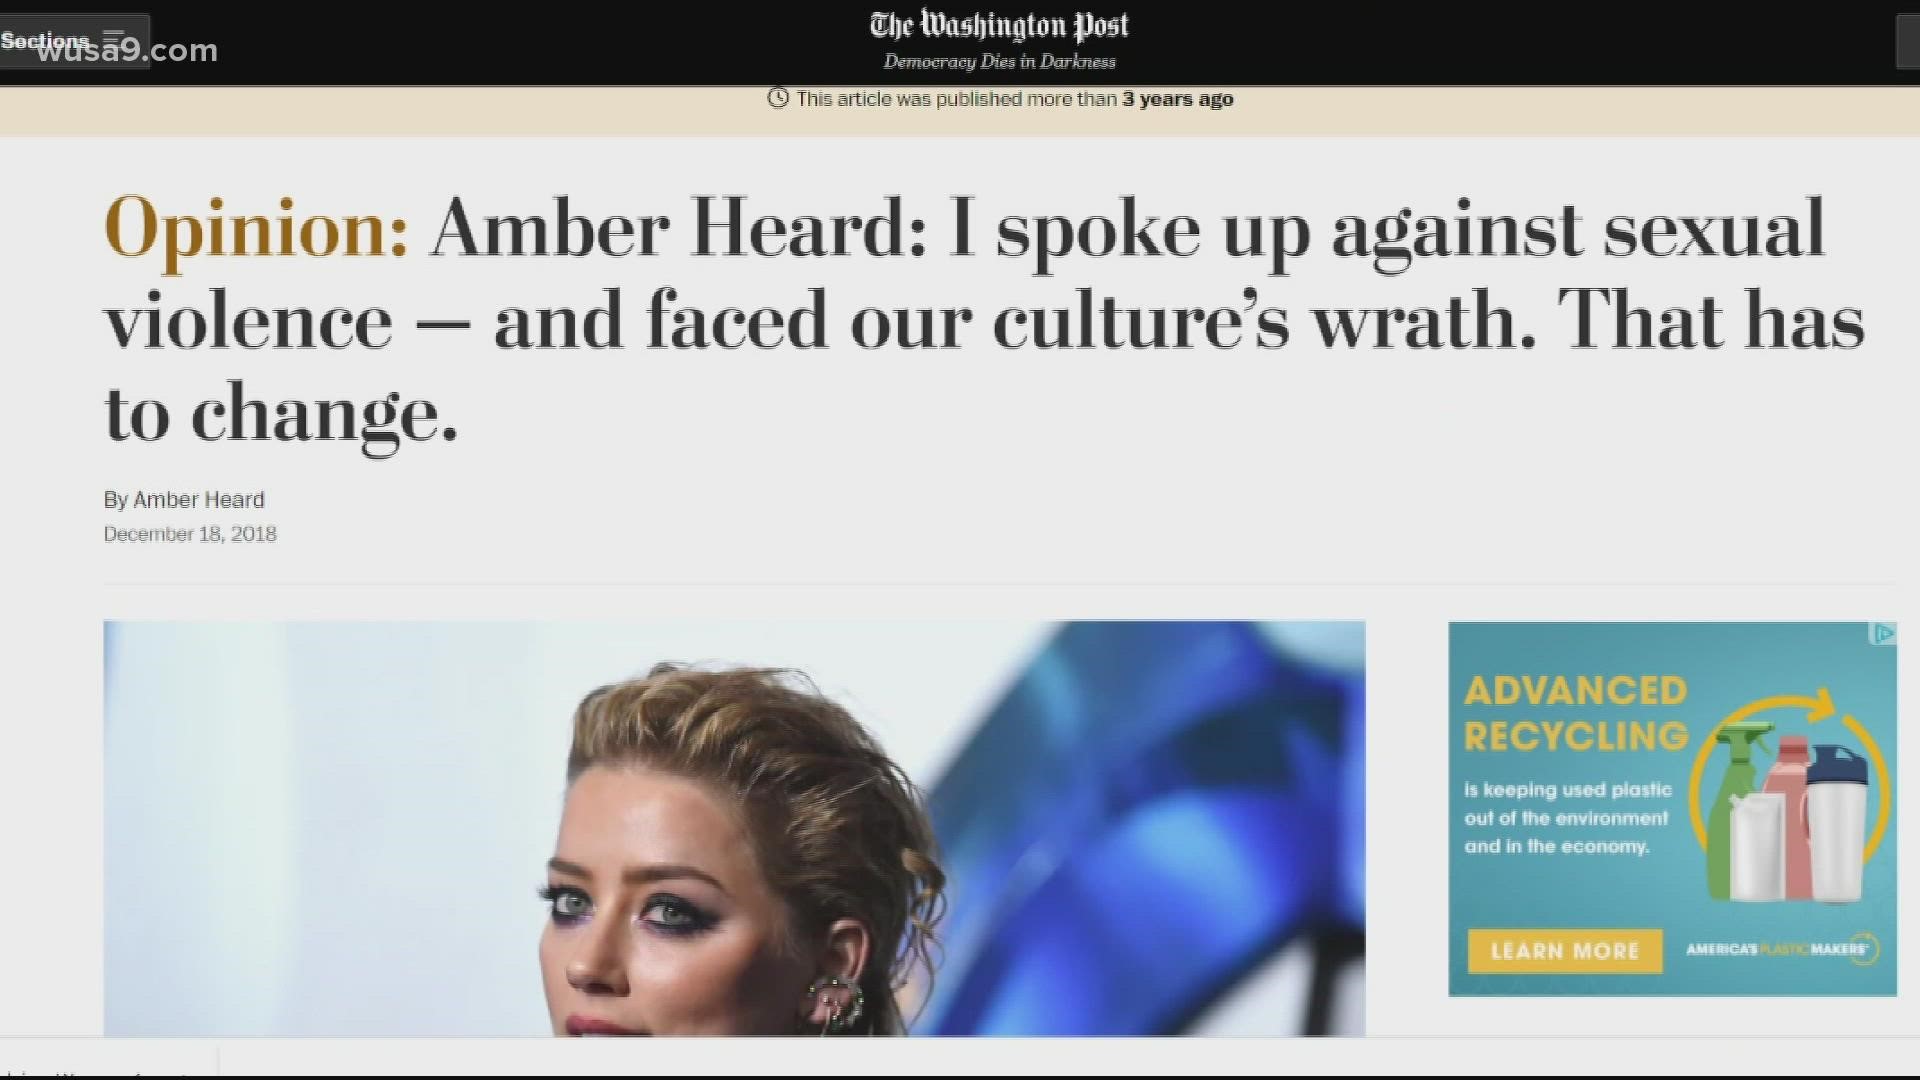 The case comes over a Washington Post Op-ed written by Amber Heard.